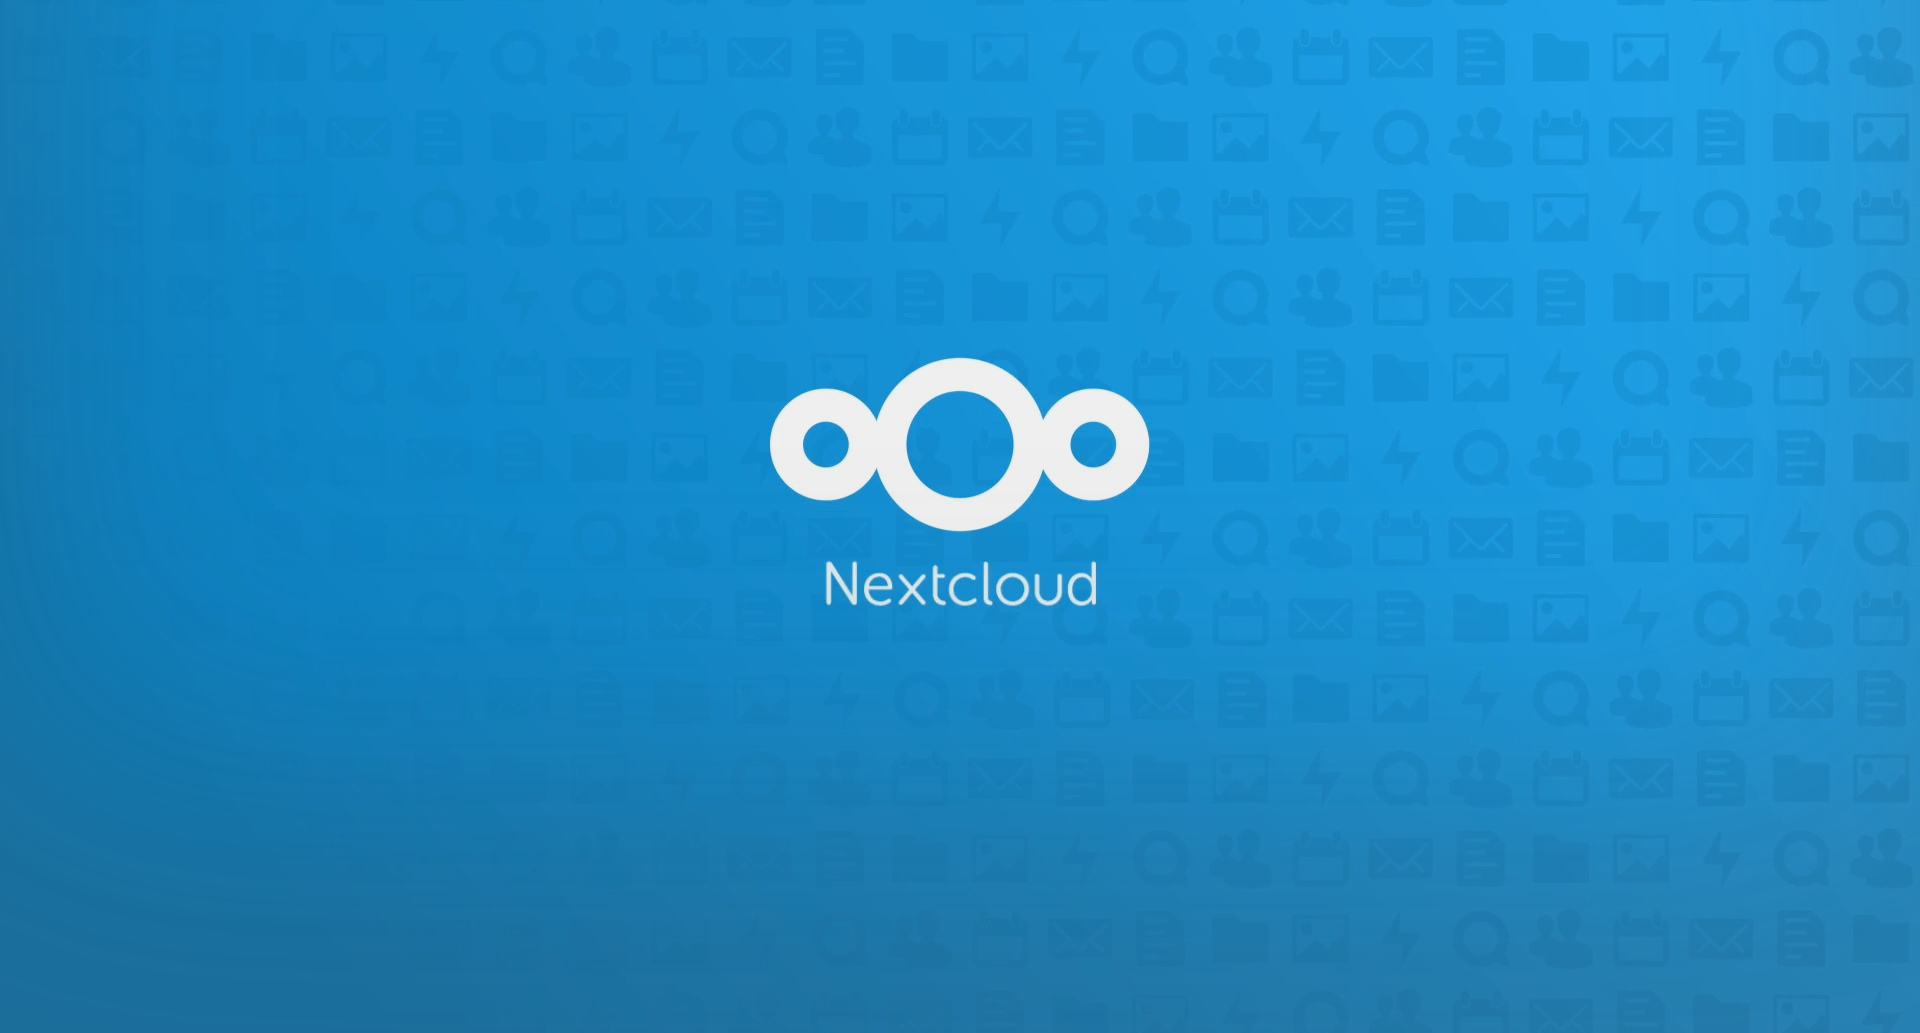 How to install Nextcloud on a VPS with Docker